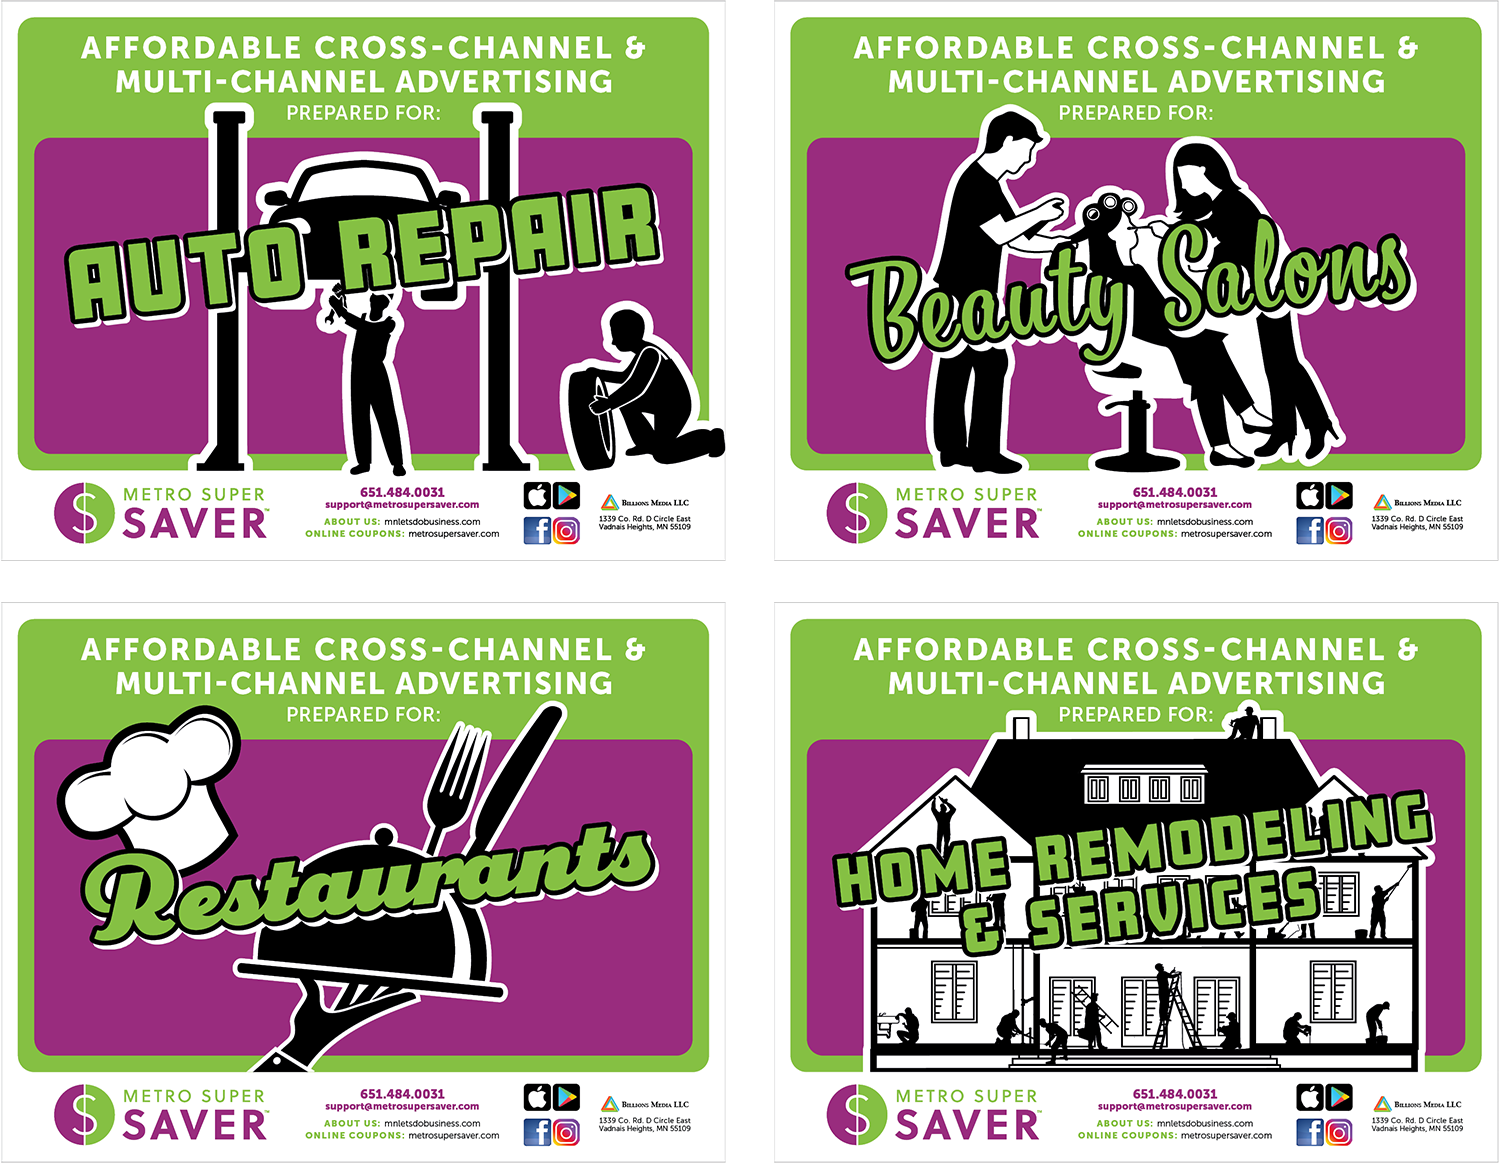 twin cities media kit design for the metro super saver